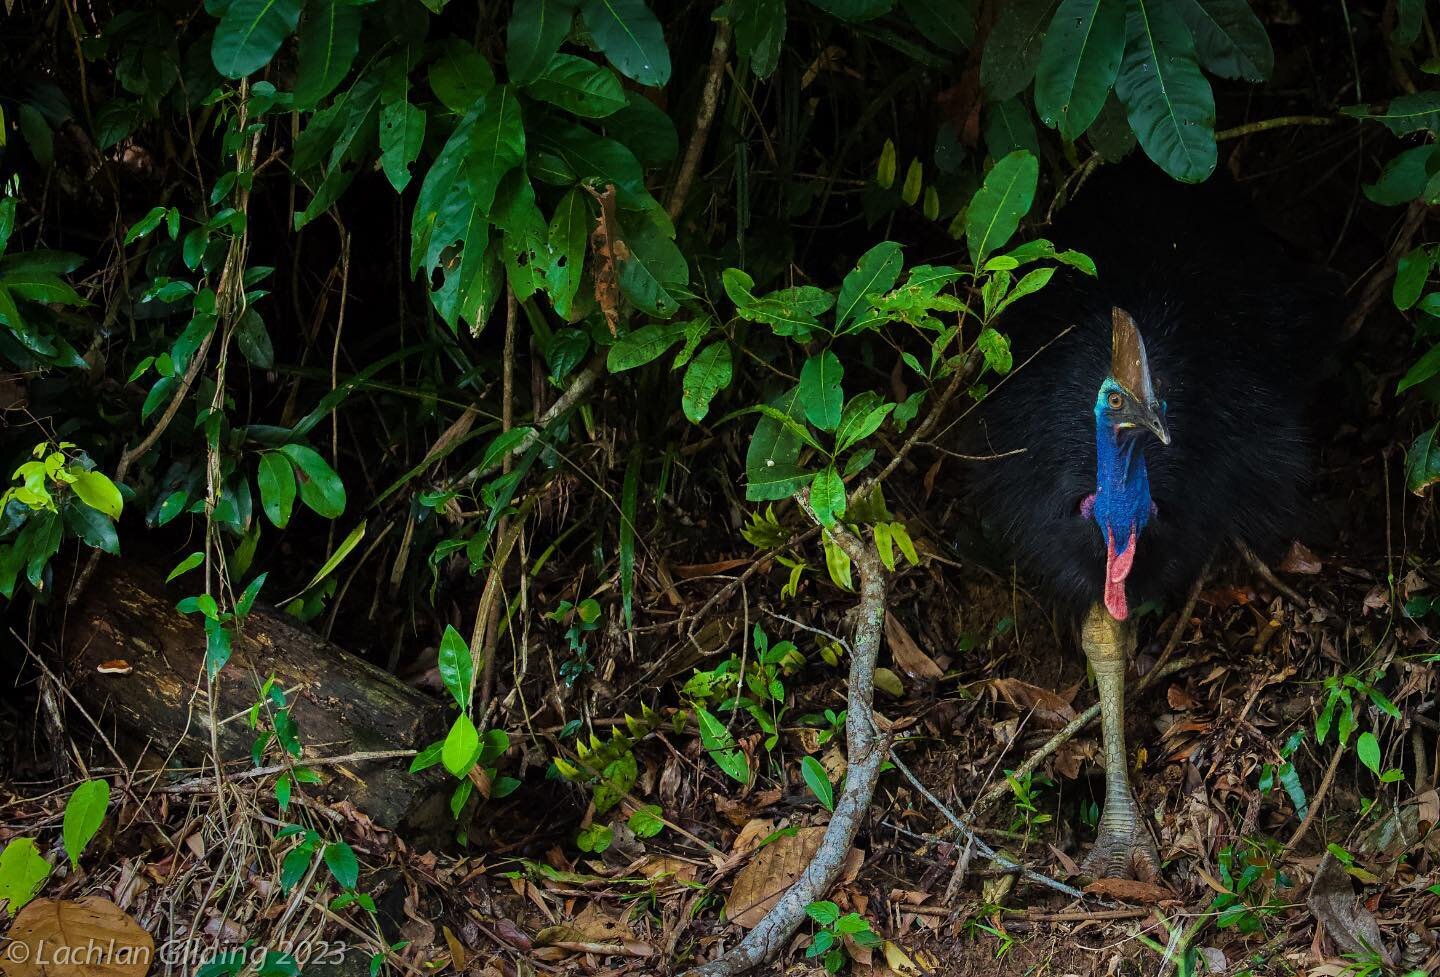 We are currently in North Queensland running a quick 3 day tour, targeting a number of North Queensland specialties. The #SouthernCassowary was no.1 on the list for our guests so we were pretty happy to get some good views on the very first morning o